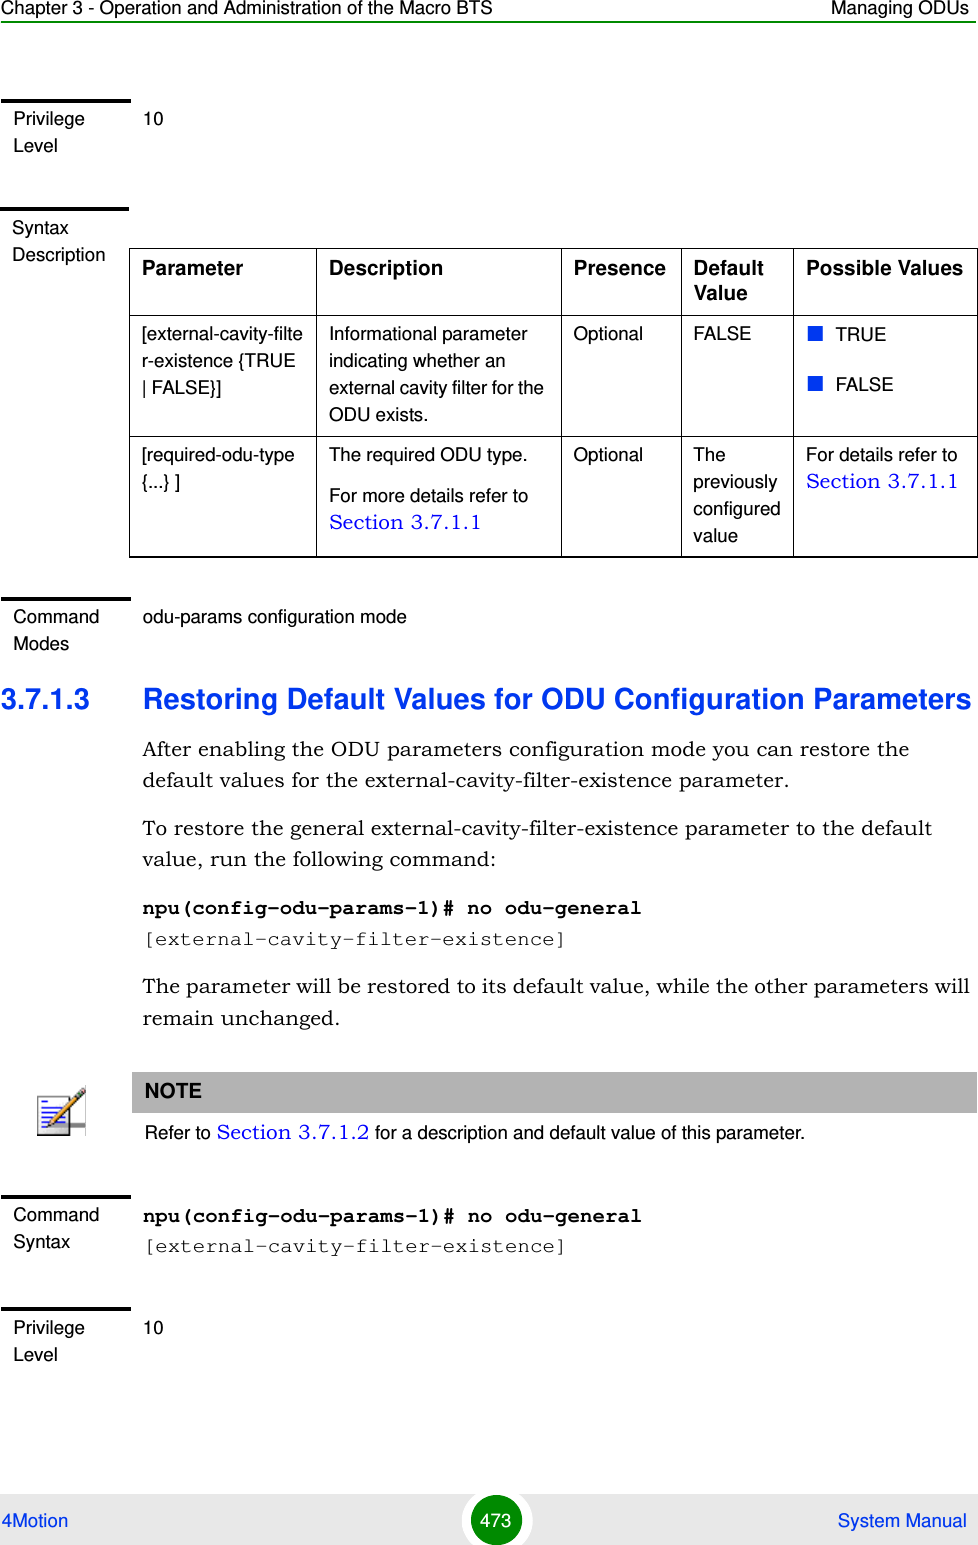 Chapter 3 - Operation and Administration of the Macro BTS Managing ODUs4Motion 473  System Manual3.7.1.3 Restoring Default Values for ODU Configuration ParametersAfter enabling the ODU parameters configuration mode you can restore the default values for the external-cavity-filter-existence parameter.To restore the general external-cavity-filter-existence parameter to the default value, run the following command:npu(config-odu-params-1)# no odu-general [external-cavity-filter-existence]The parameter will be restored to its default value, while the other parameters will remain unchanged.Privilege Level10Syntax Description Parameter Description Presence Default ValuePossible Values[external-cavity-filter-existence {TRUE | FALSE}]Informational parameter indicating whether an external cavity filter for the ODU exists. Optional FALSE TRUEFALSE[required-odu-type {...} ]The required ODU type. For more details refer to Section 3.7.1.1Optional The previously configured valueFor details refer to Section 3.7.1.1Command Modesodu-params configuration modeNOTERefer to Section 3.7.1.2 for a description and default value of this parameter.Command Syntaxnpu(config-odu-params-1)# no odu-general [external-cavity-filter-existence]Privilege Level10